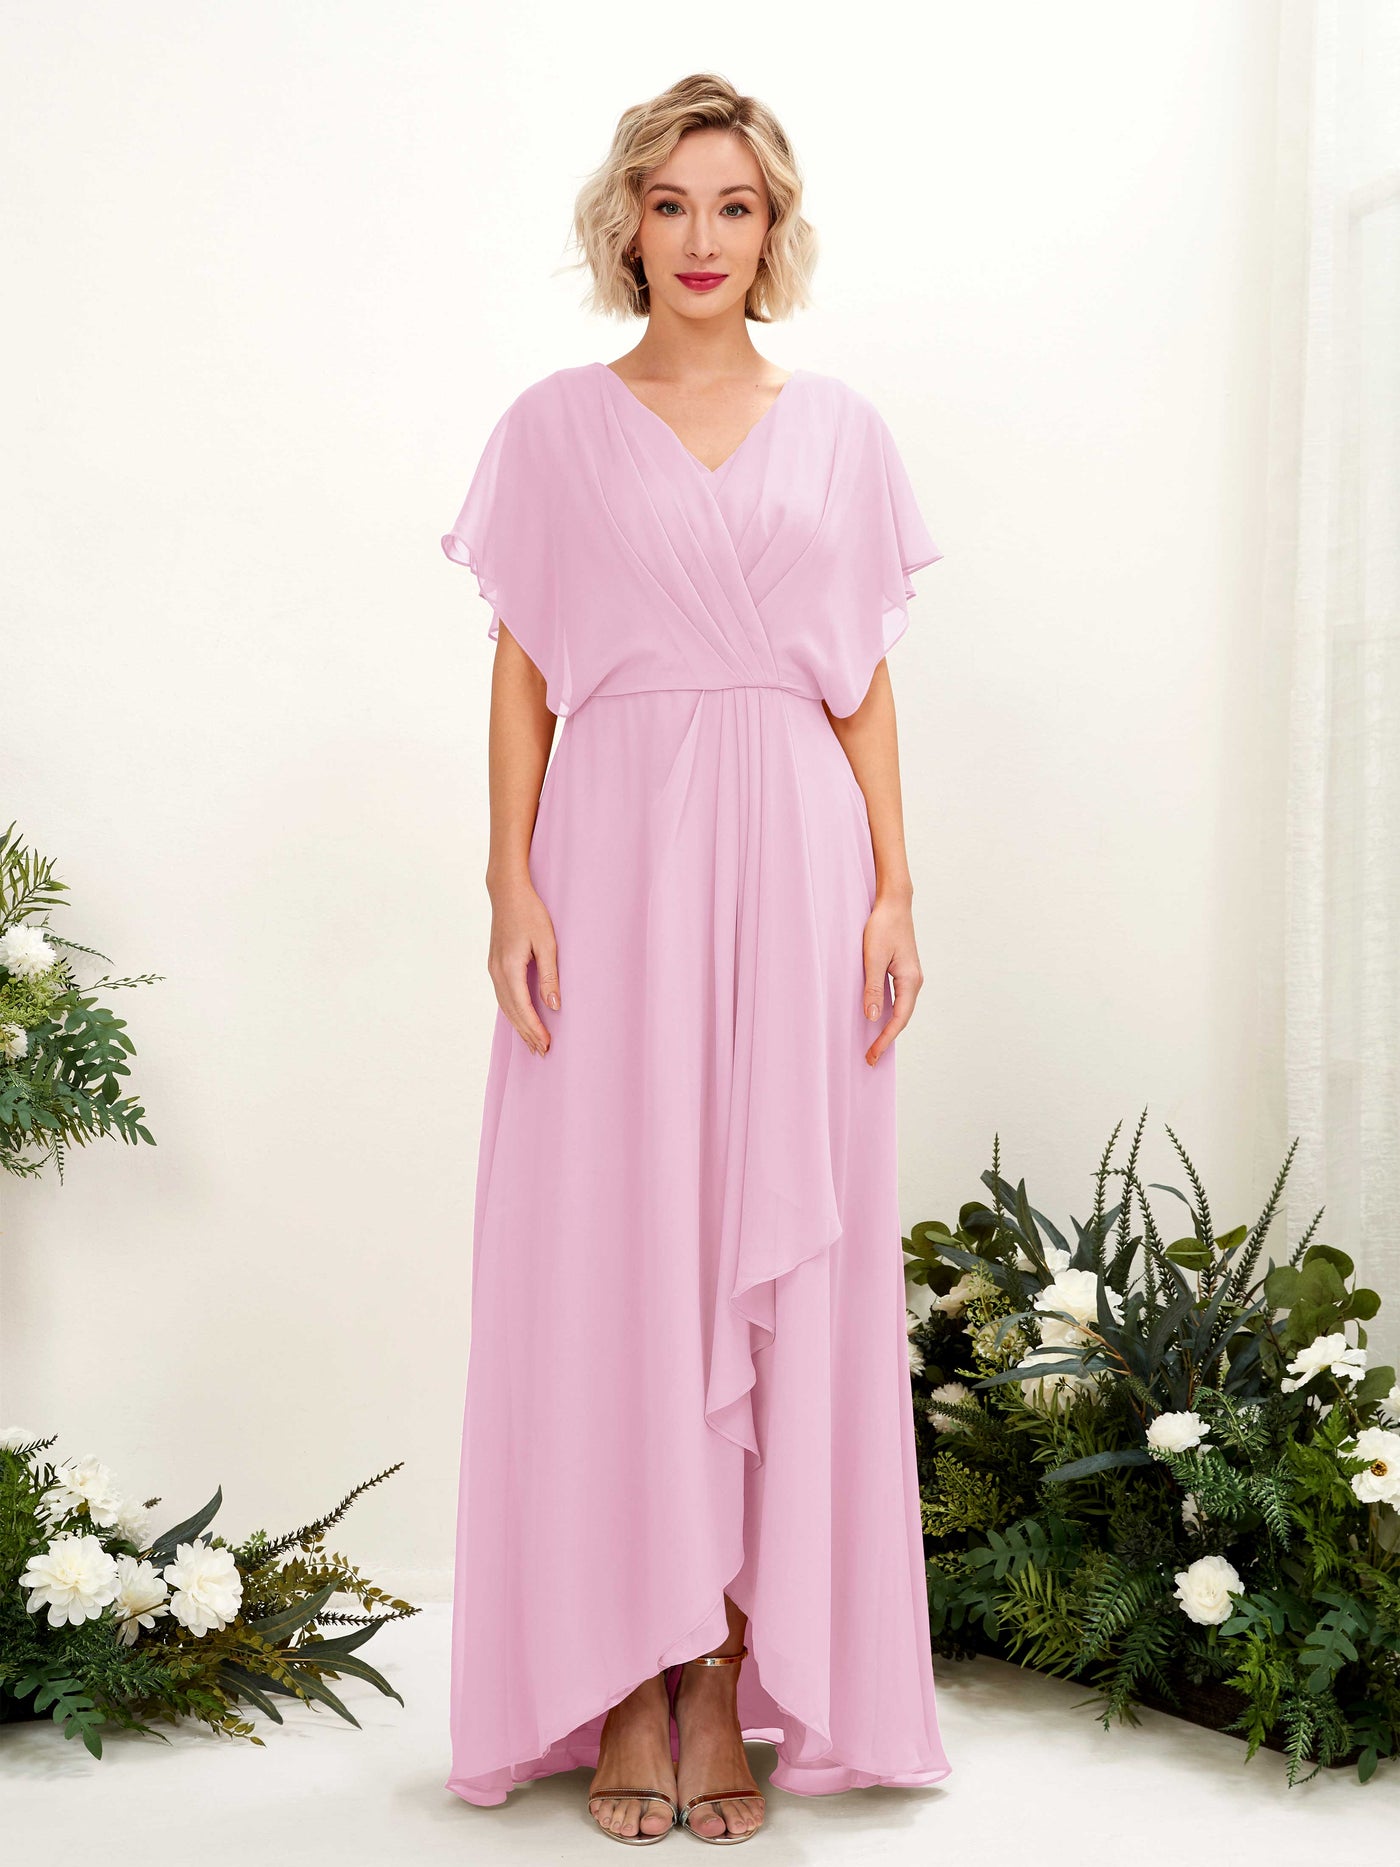 Candy Pink Bridesmaid Dresses Bridesmaid Dress A-line Chiffon V-neck Full Length Short Sleeves Wedding Party Dress (81222139)#color_candy-pink